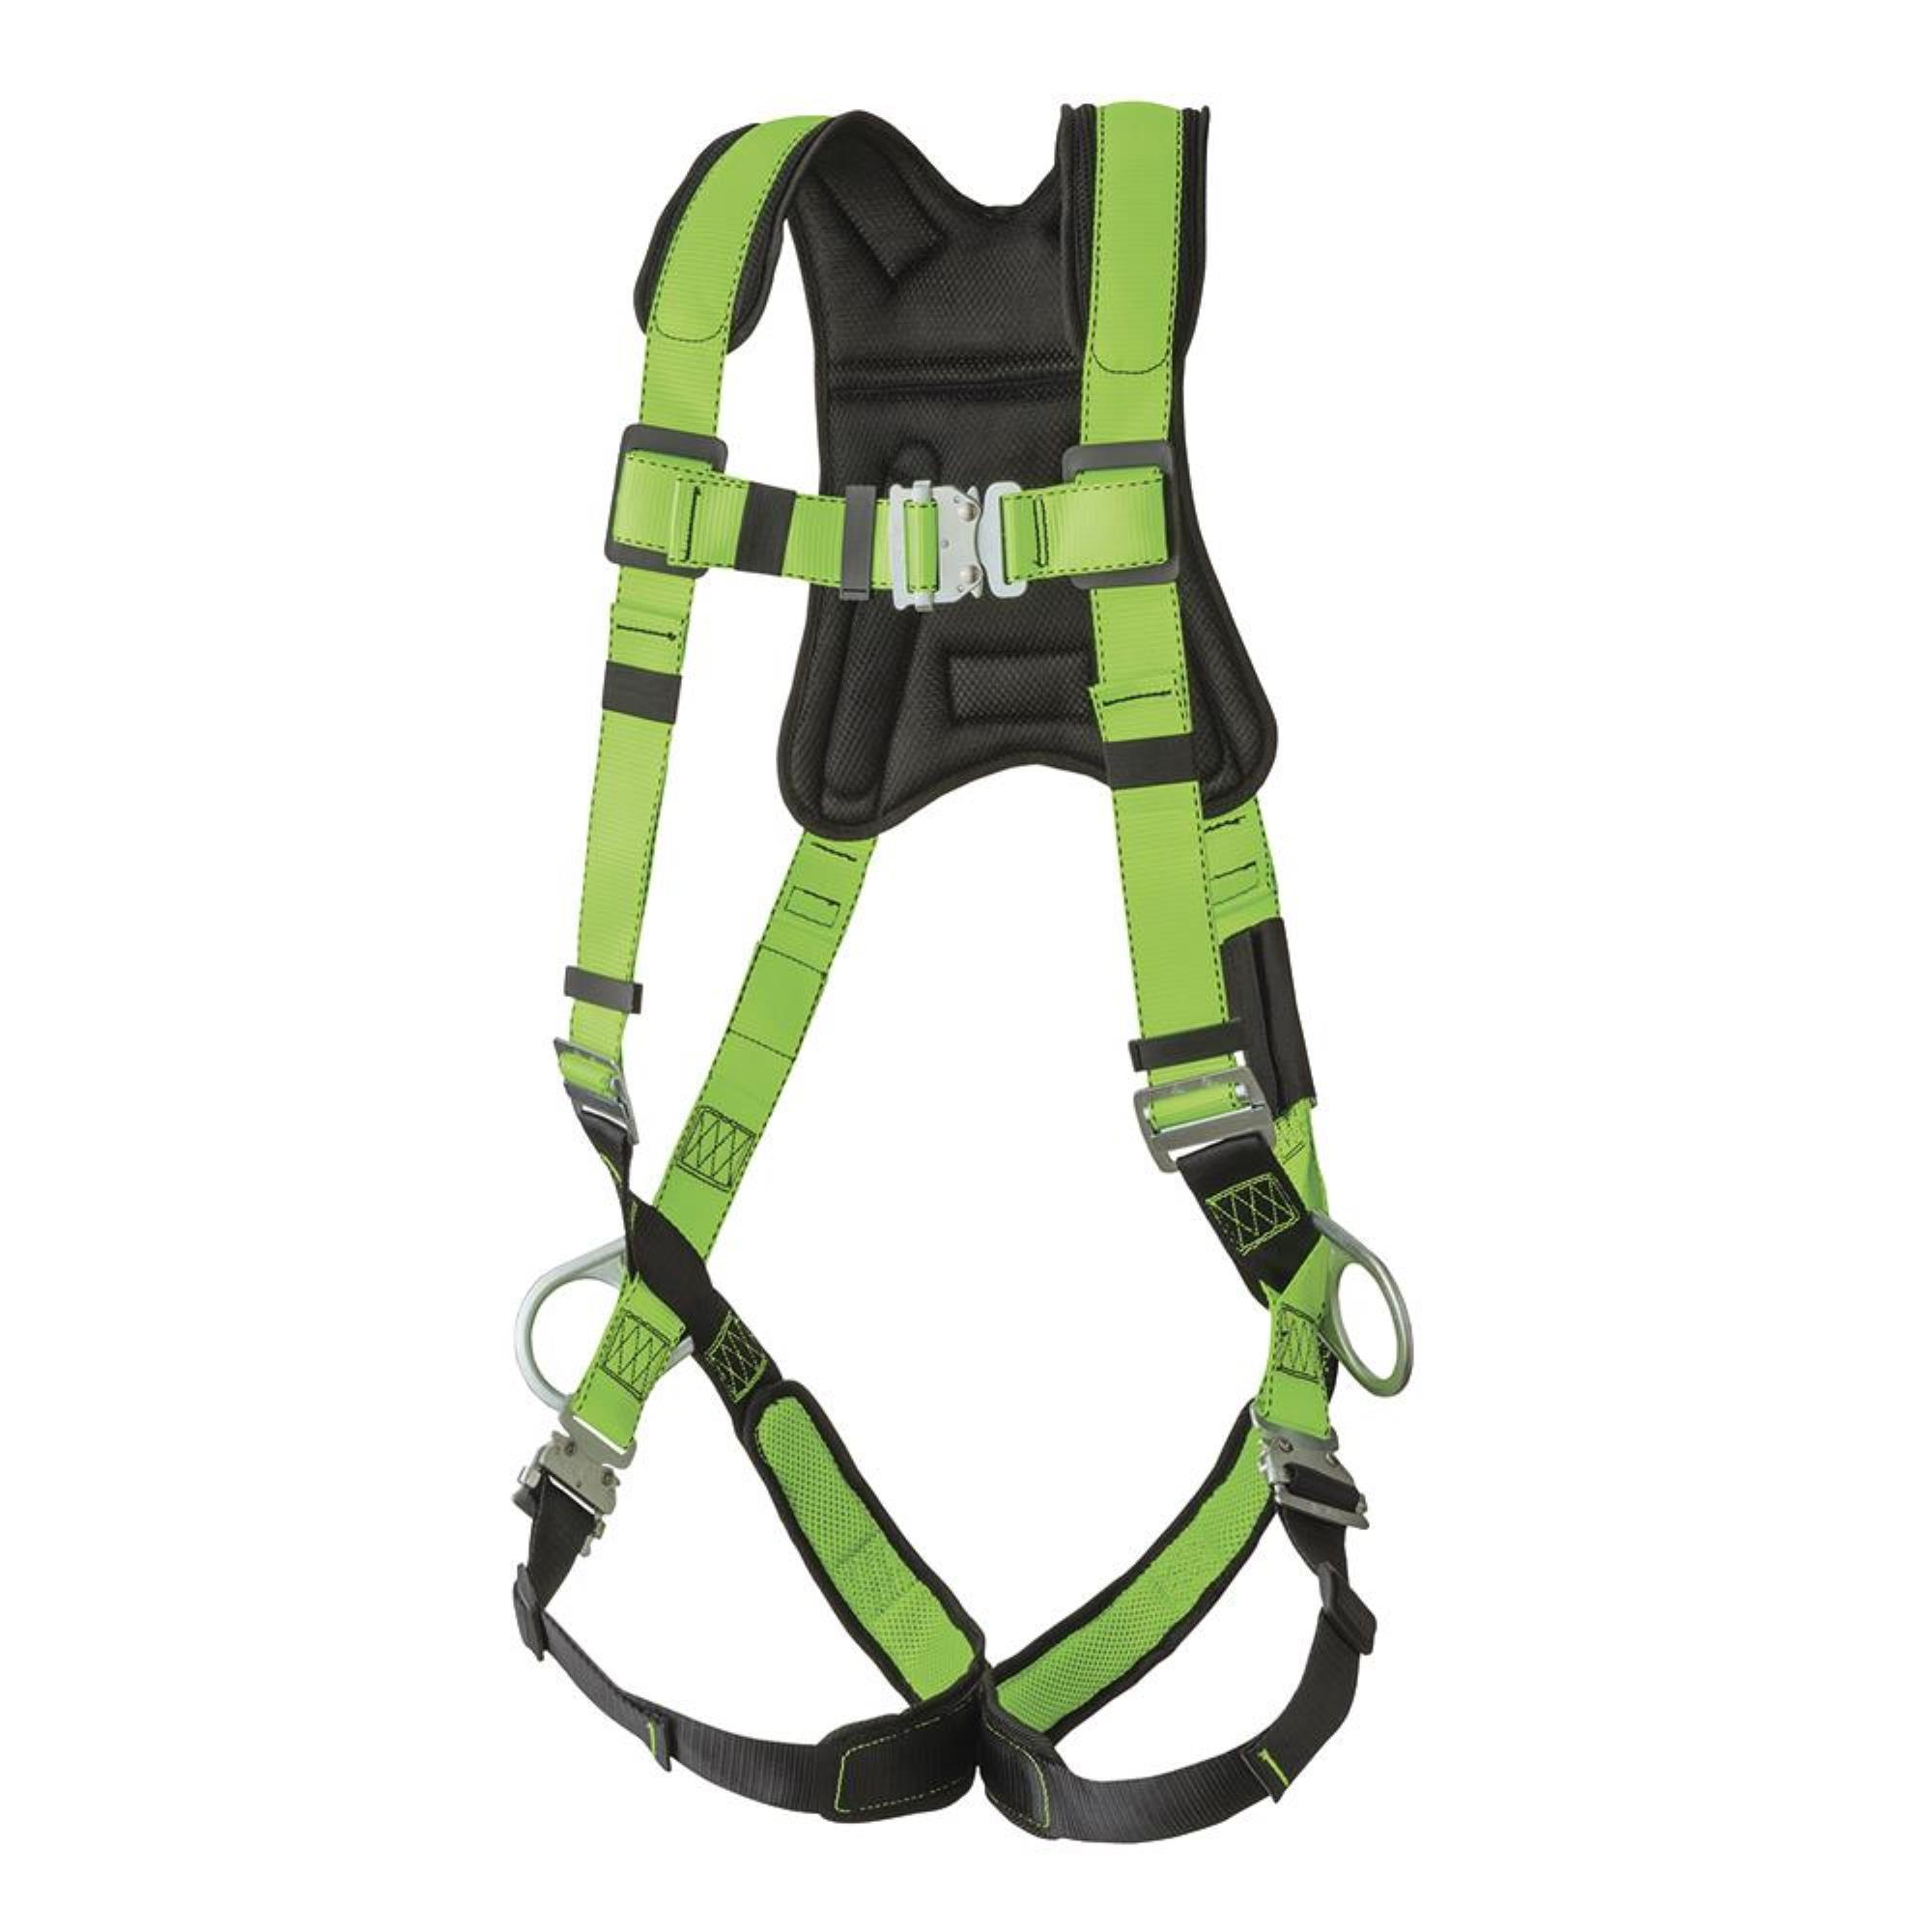 Peak Works, PeakPro Harness 3D 400 Lbs Class AP Trauma Strap, Weight Capacity 400 lb, Harness Size One Size, Model V8006110